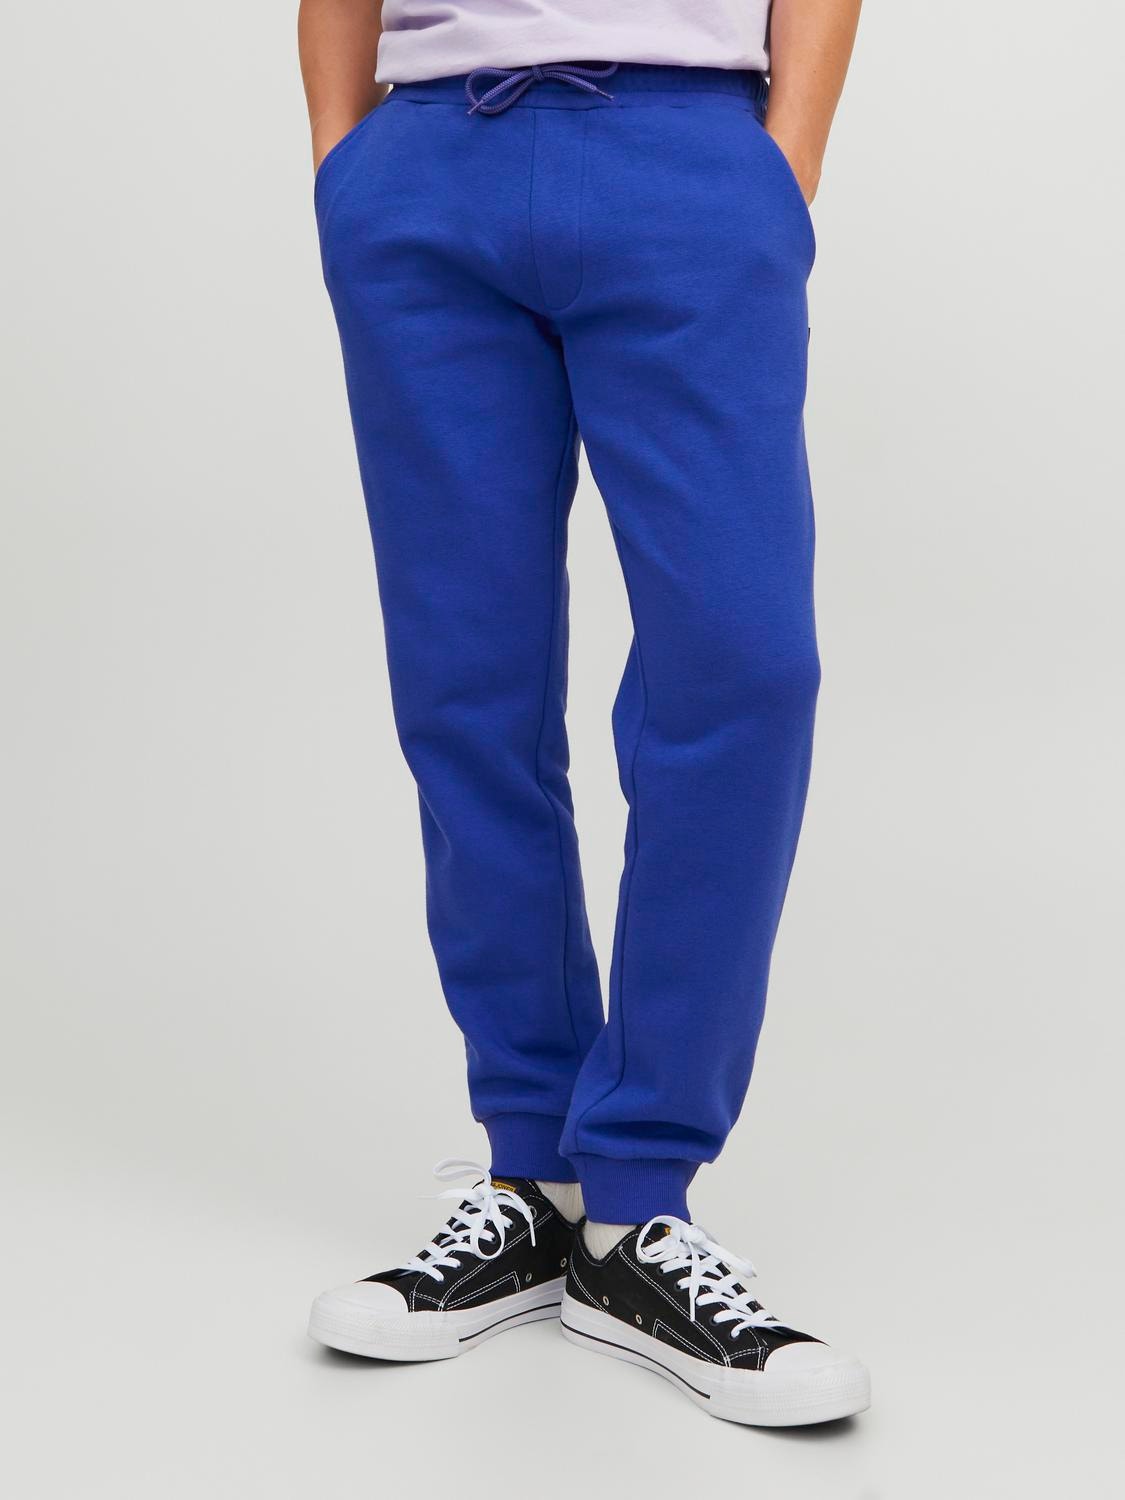 Regular Fit Joggers with 20% discount!